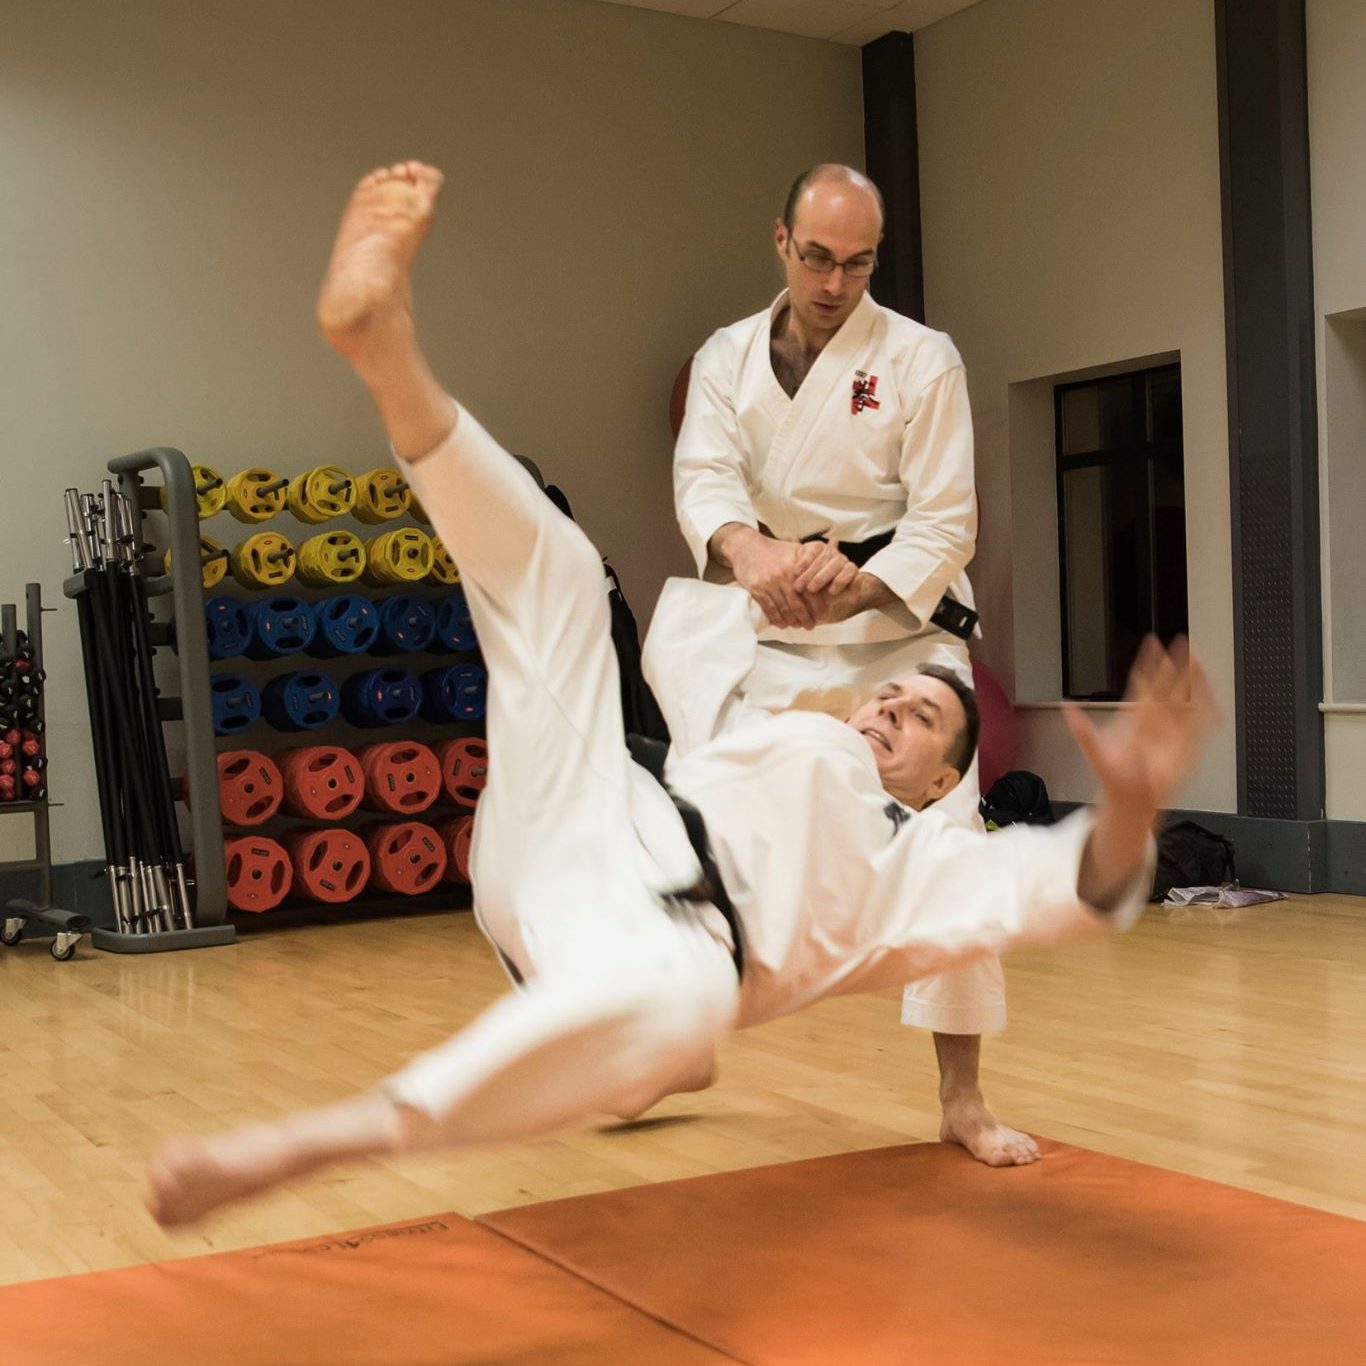 Throwing techniques are often practiced on mats for safety.